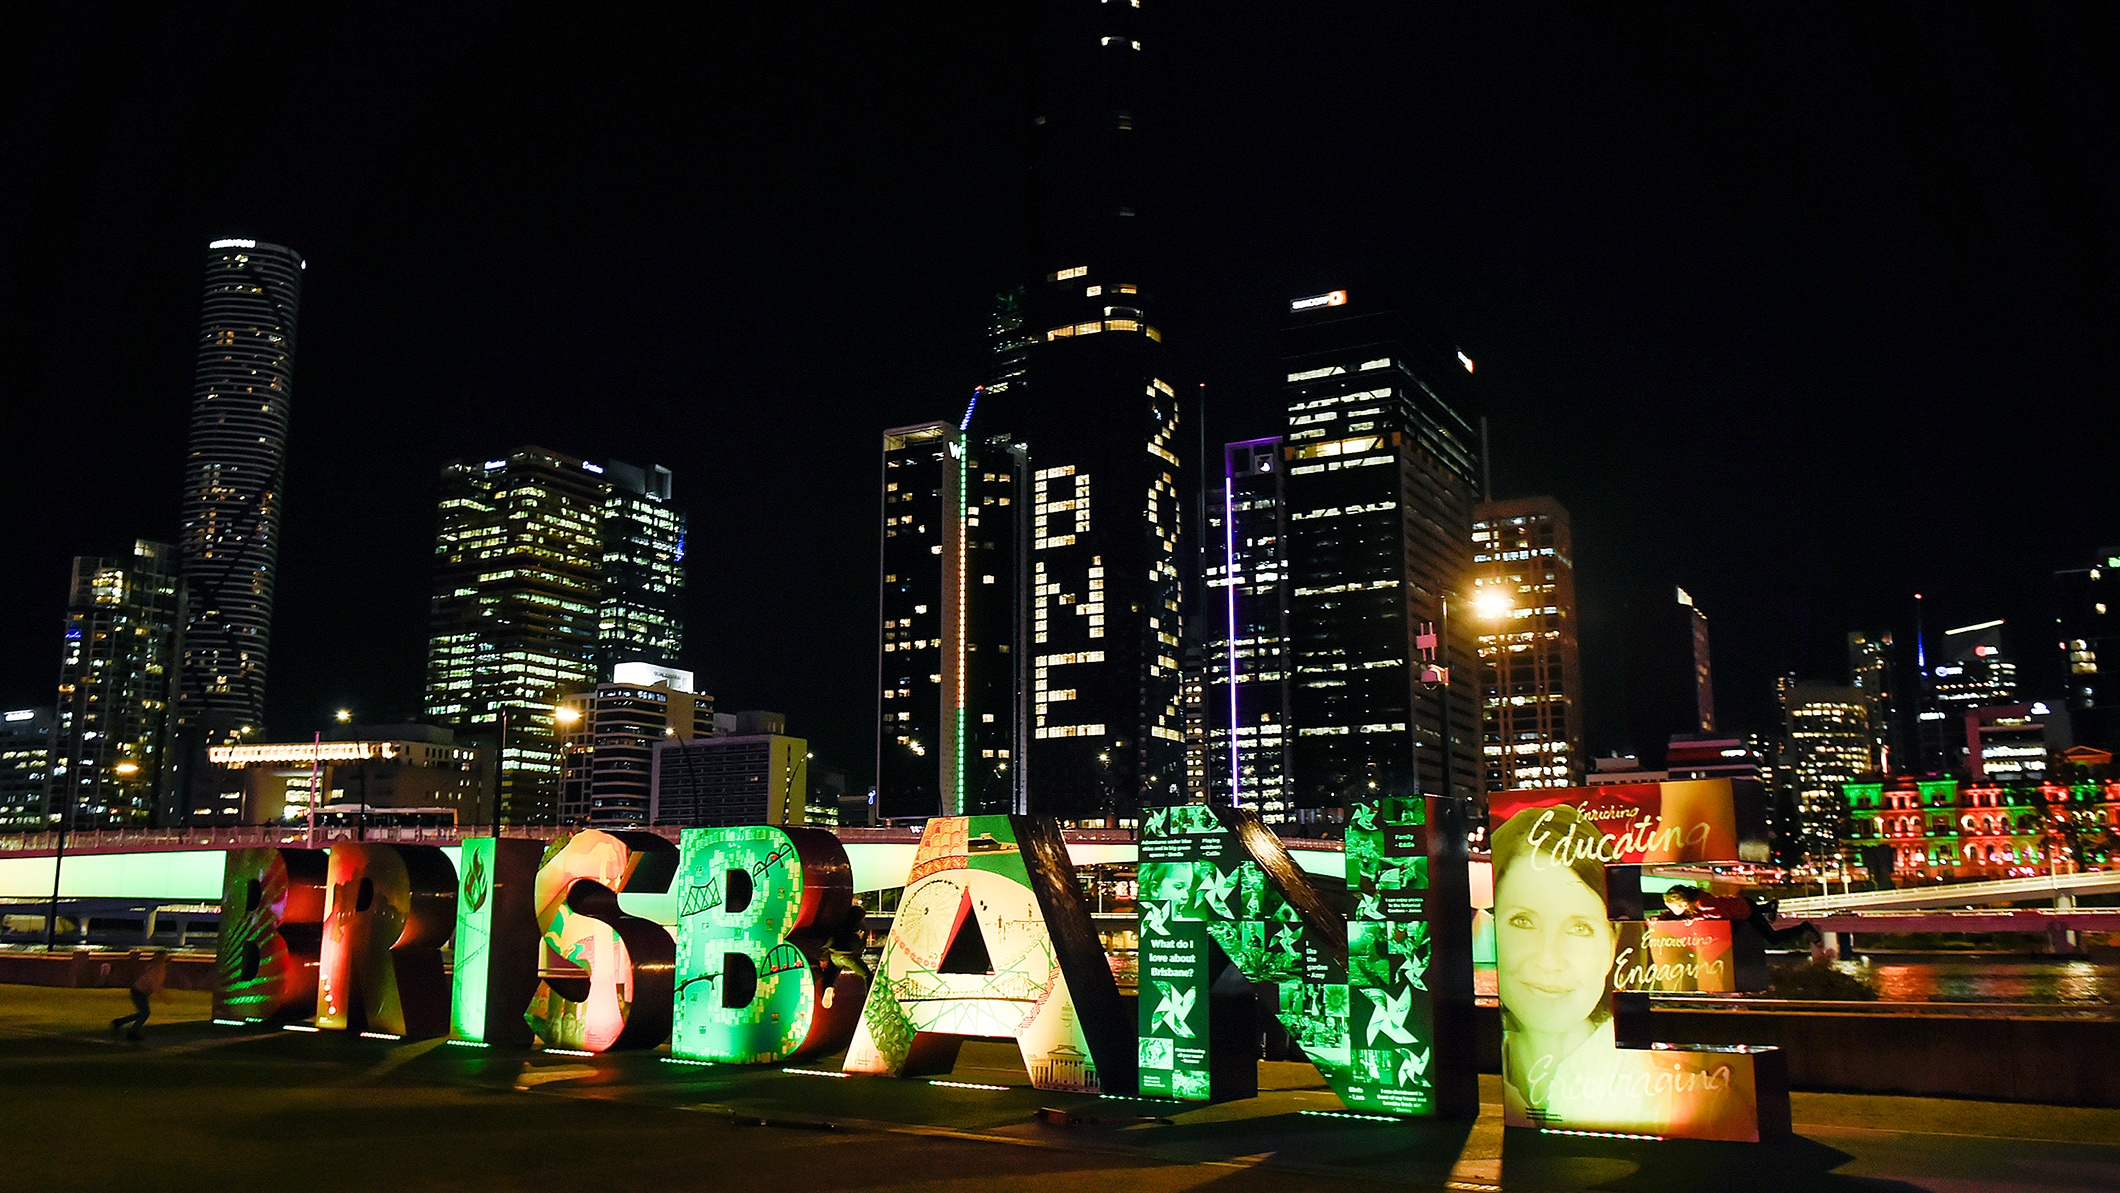 Queensland marks 10 years to go until Olympic Games Brisbane 2032